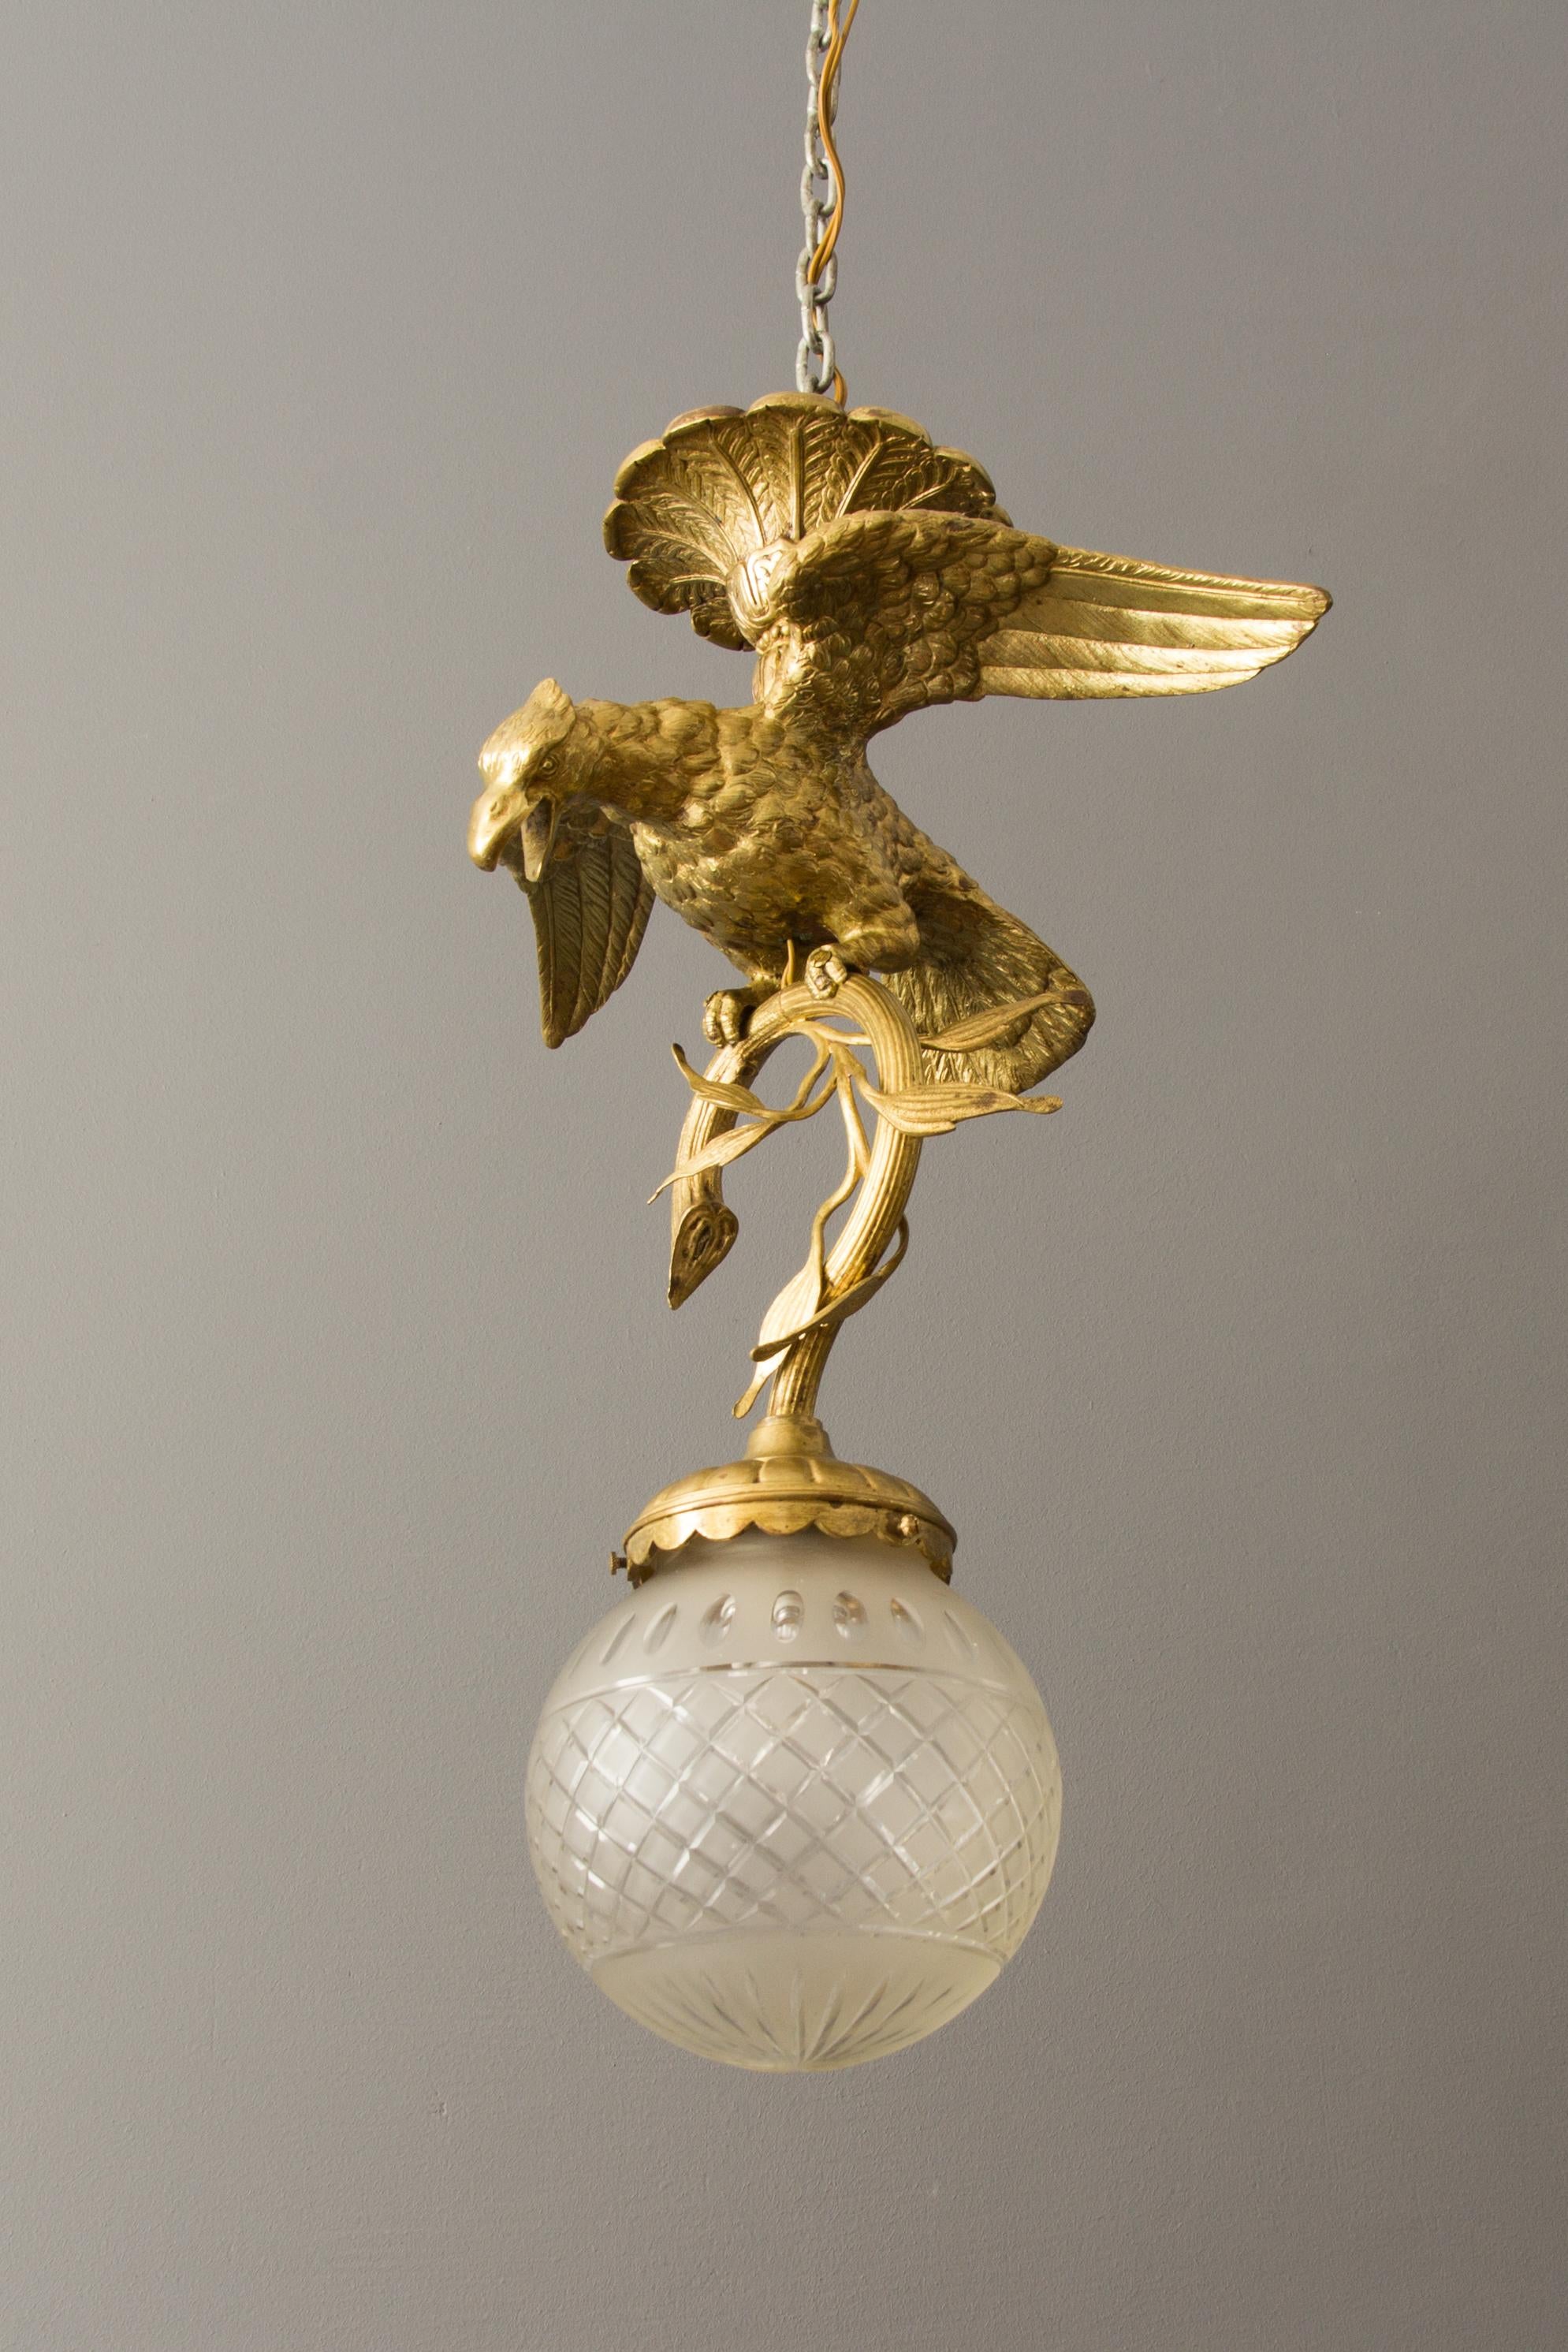 Beautiful massive bronze chandelier from the 1920s - eagle holding a branch - a fixture for the frosted glass lamp shade. The pendant has one socket for the E27 size light bulb.
Measures: Height is 20.4 inches / 52 cm; diameter - 14.5 inches / 37 cm.